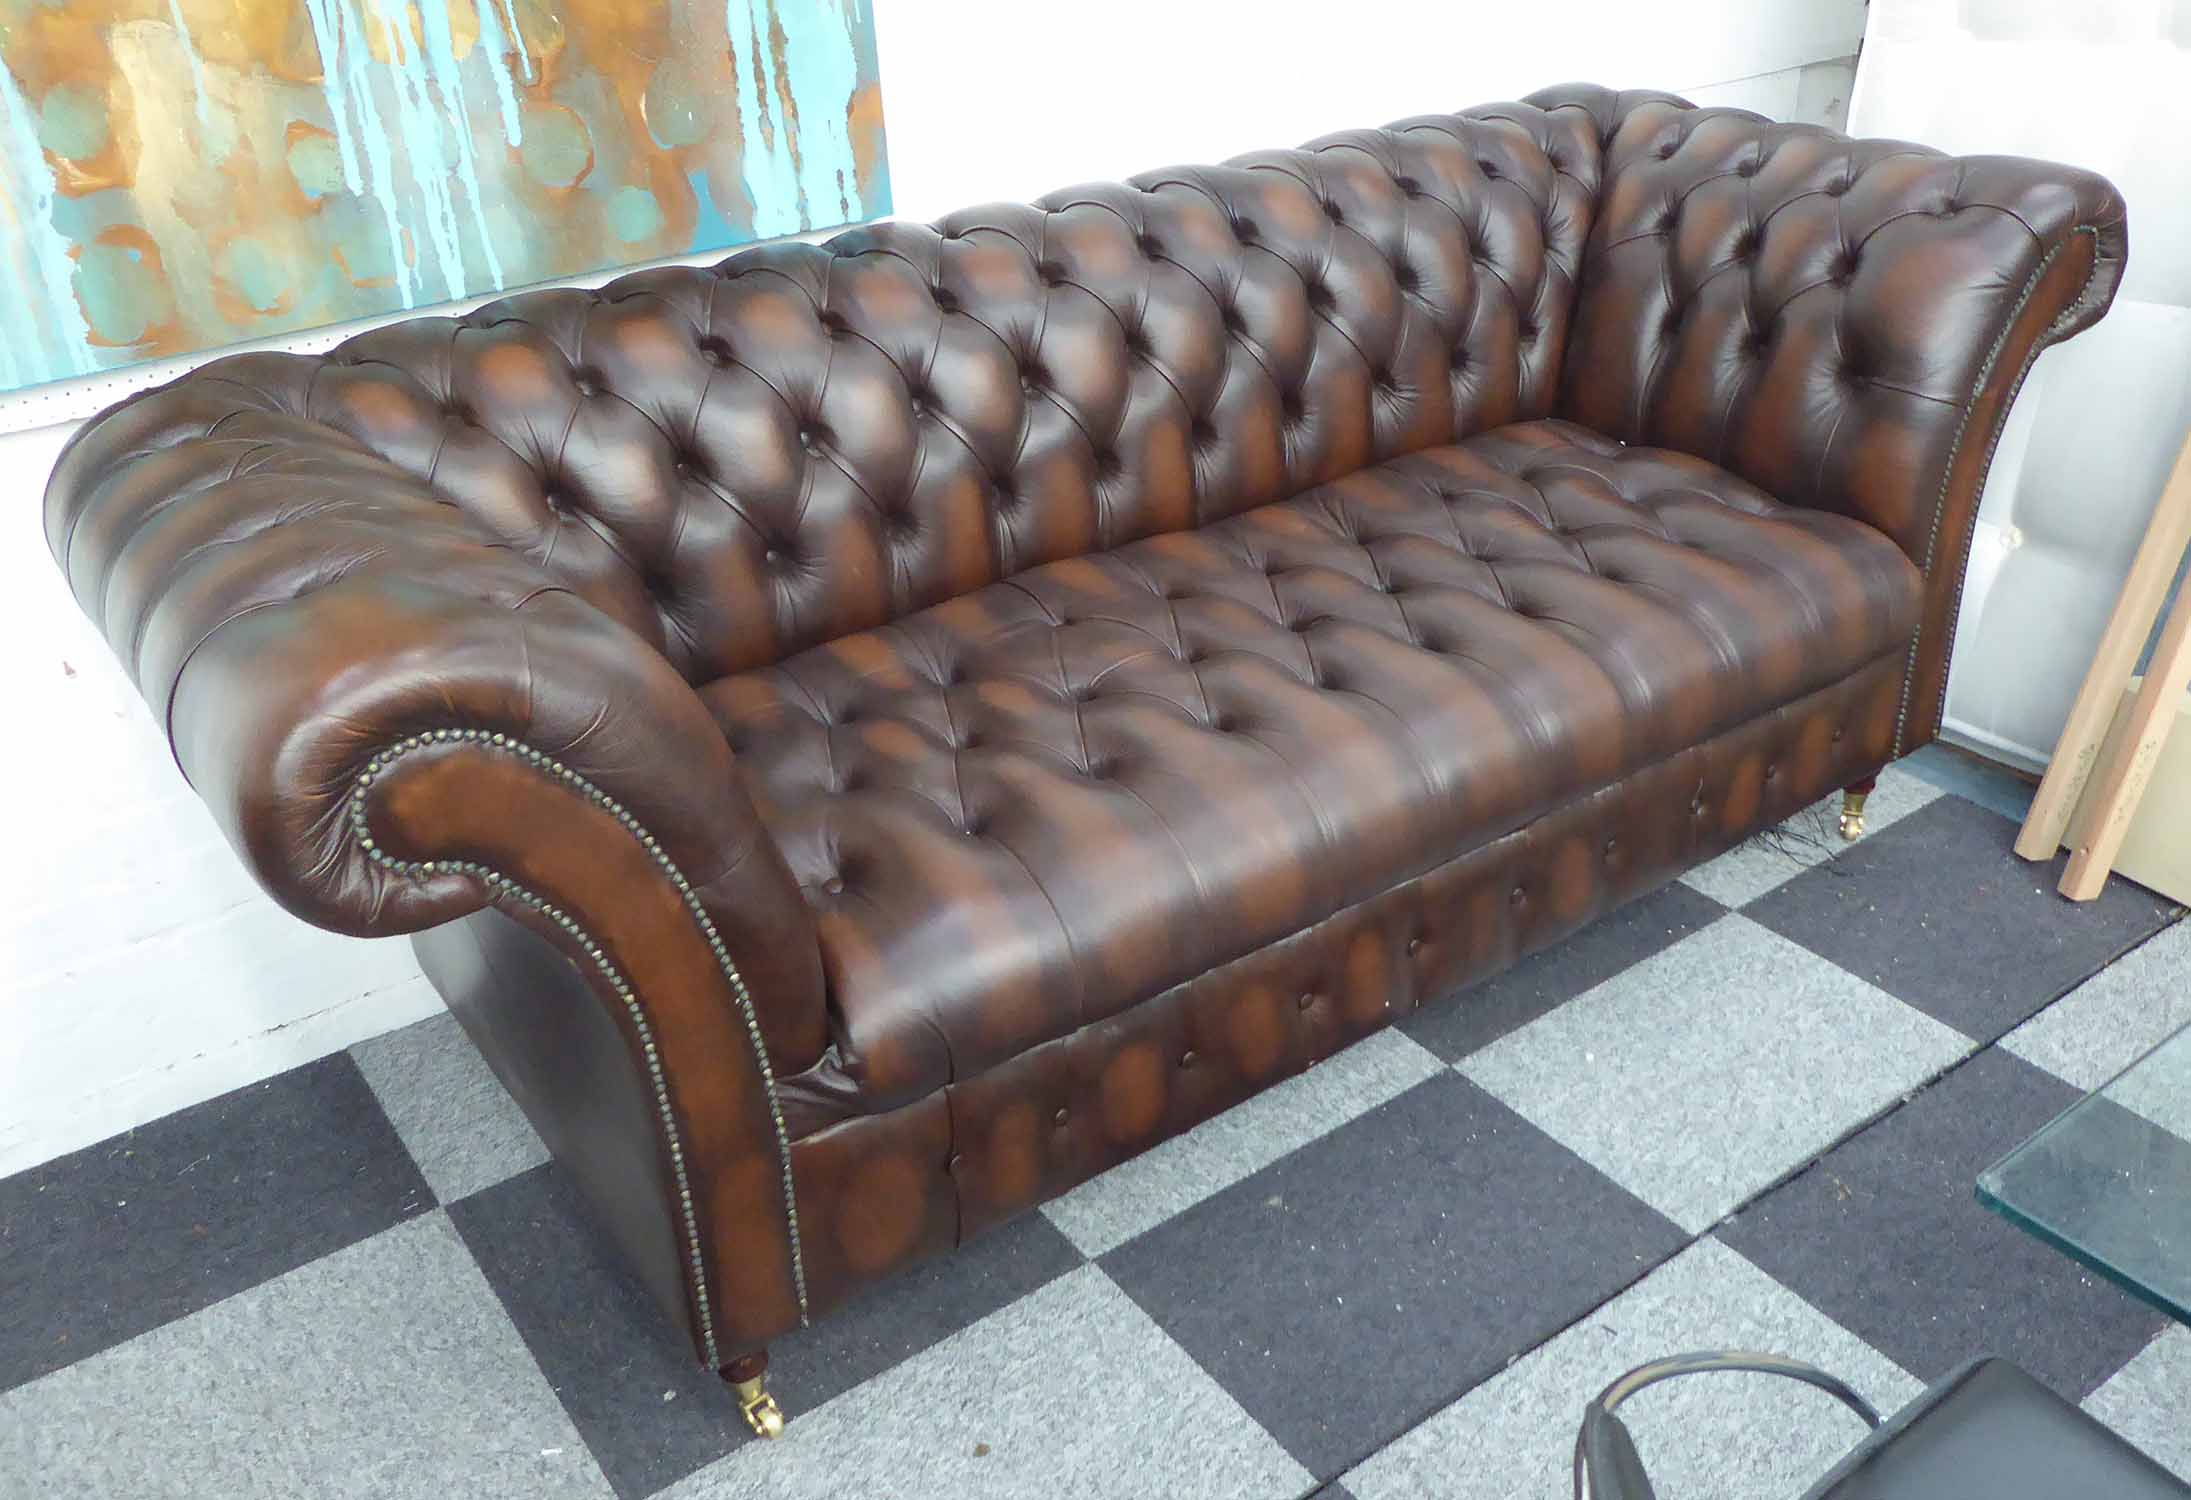  CHESTERFIELD  STYLE  SOFA  brown leather finish 215cm wide 